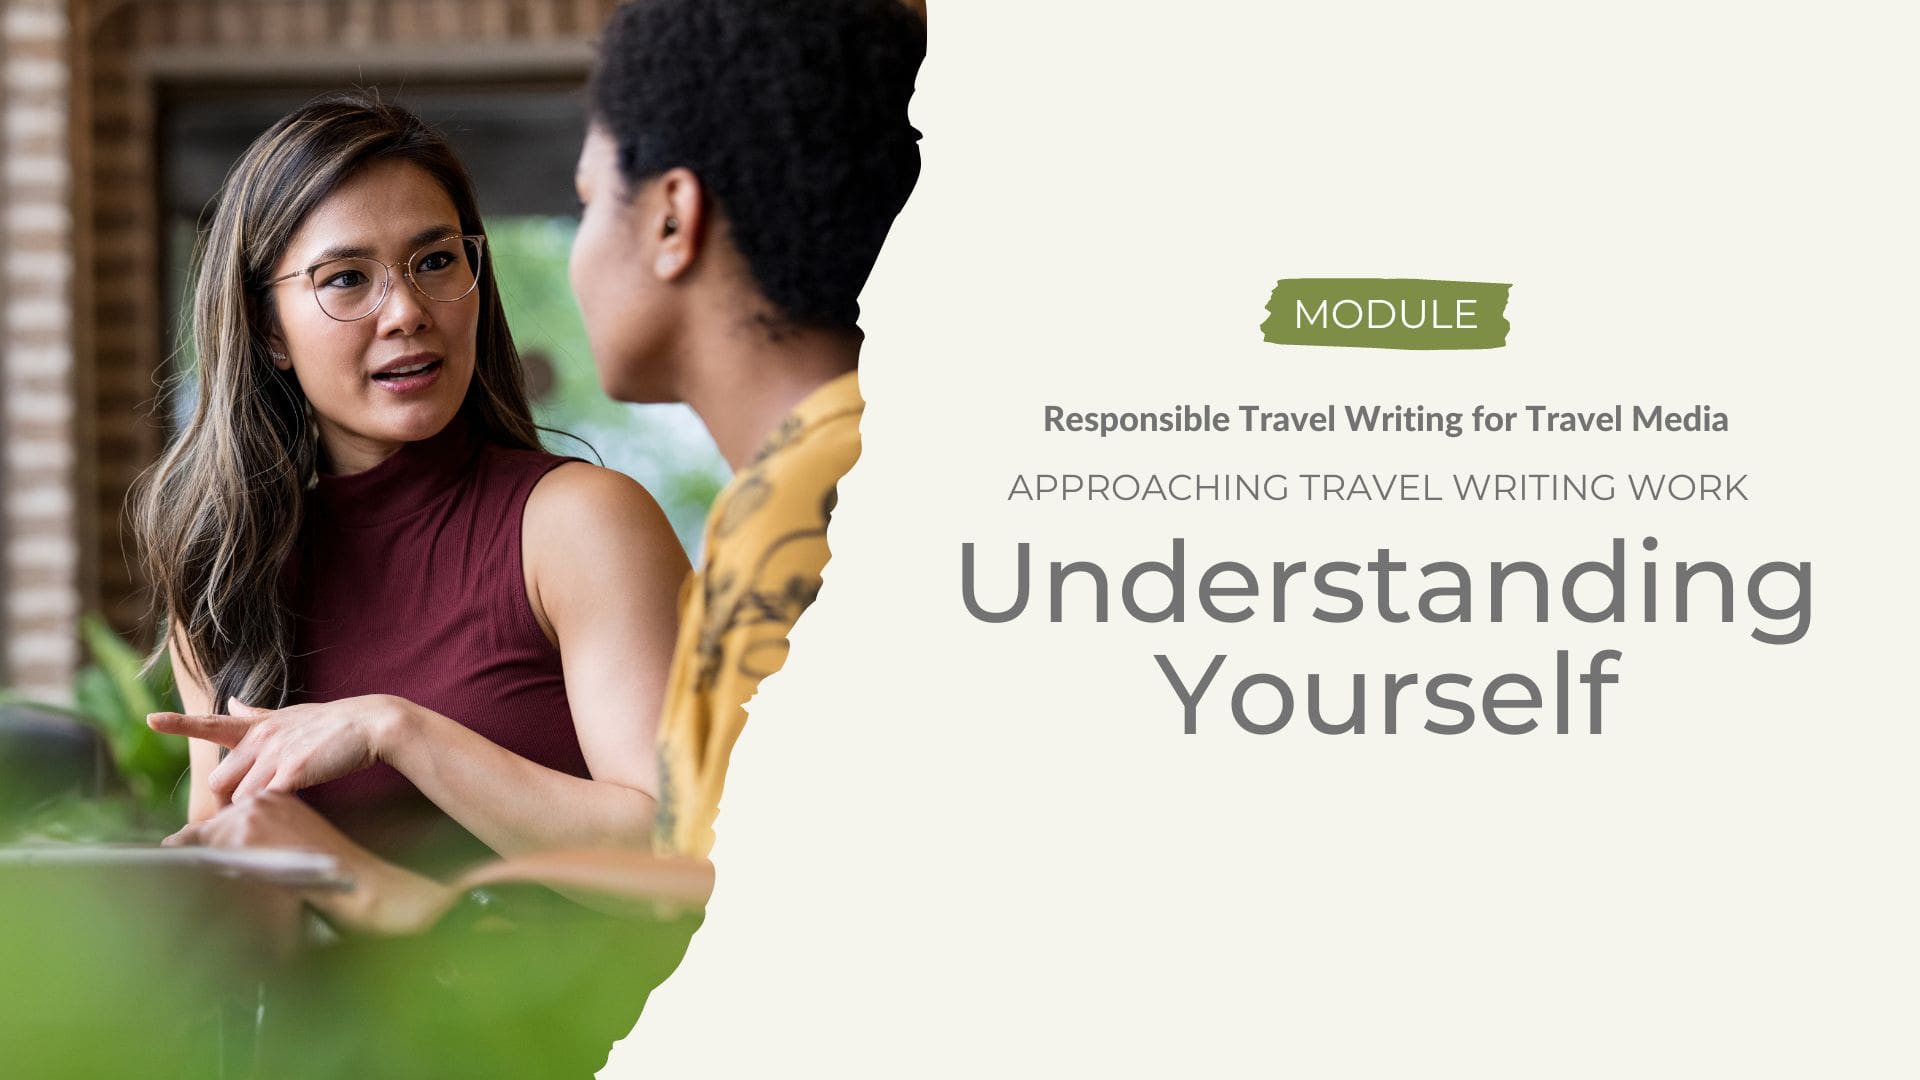 Approaching Travel Writing Work - Understanding Yourself